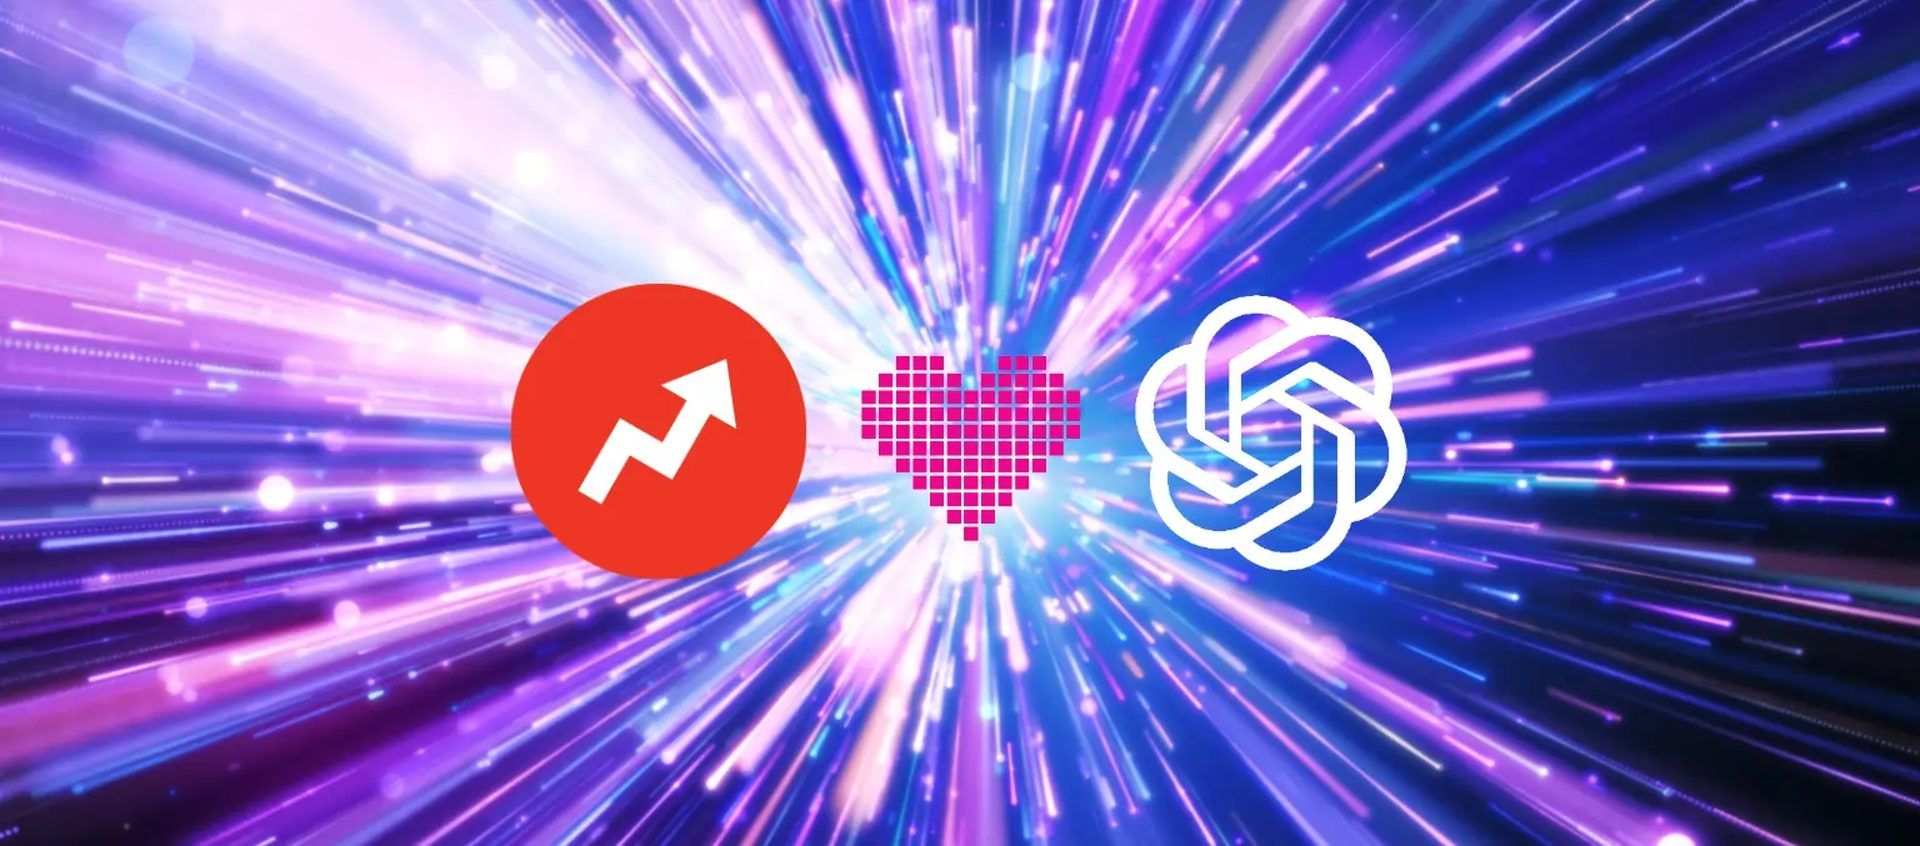 BuzzFeed ChatGPT deal: Buzzfeed stock surges in enthusiasm over OpenAI